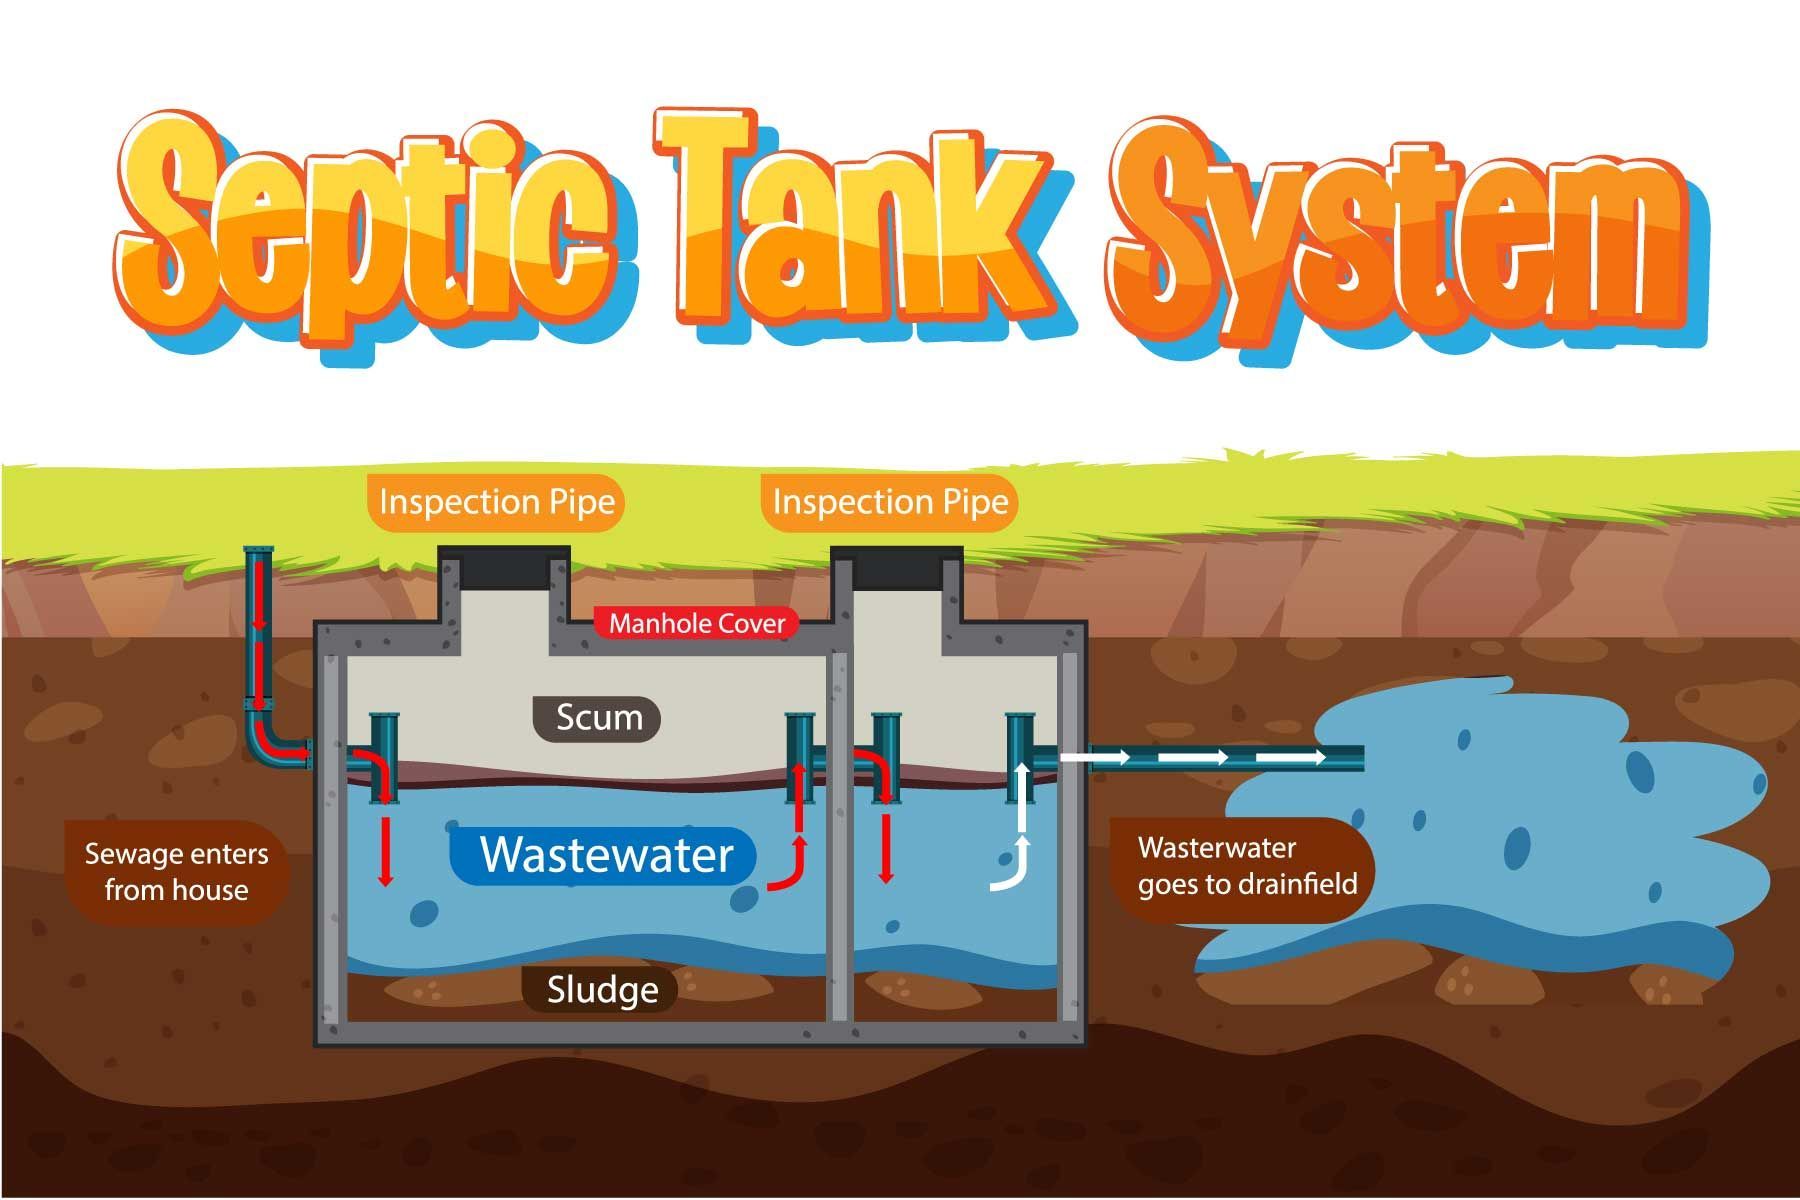 A diagram of a septic tank system on a white background.